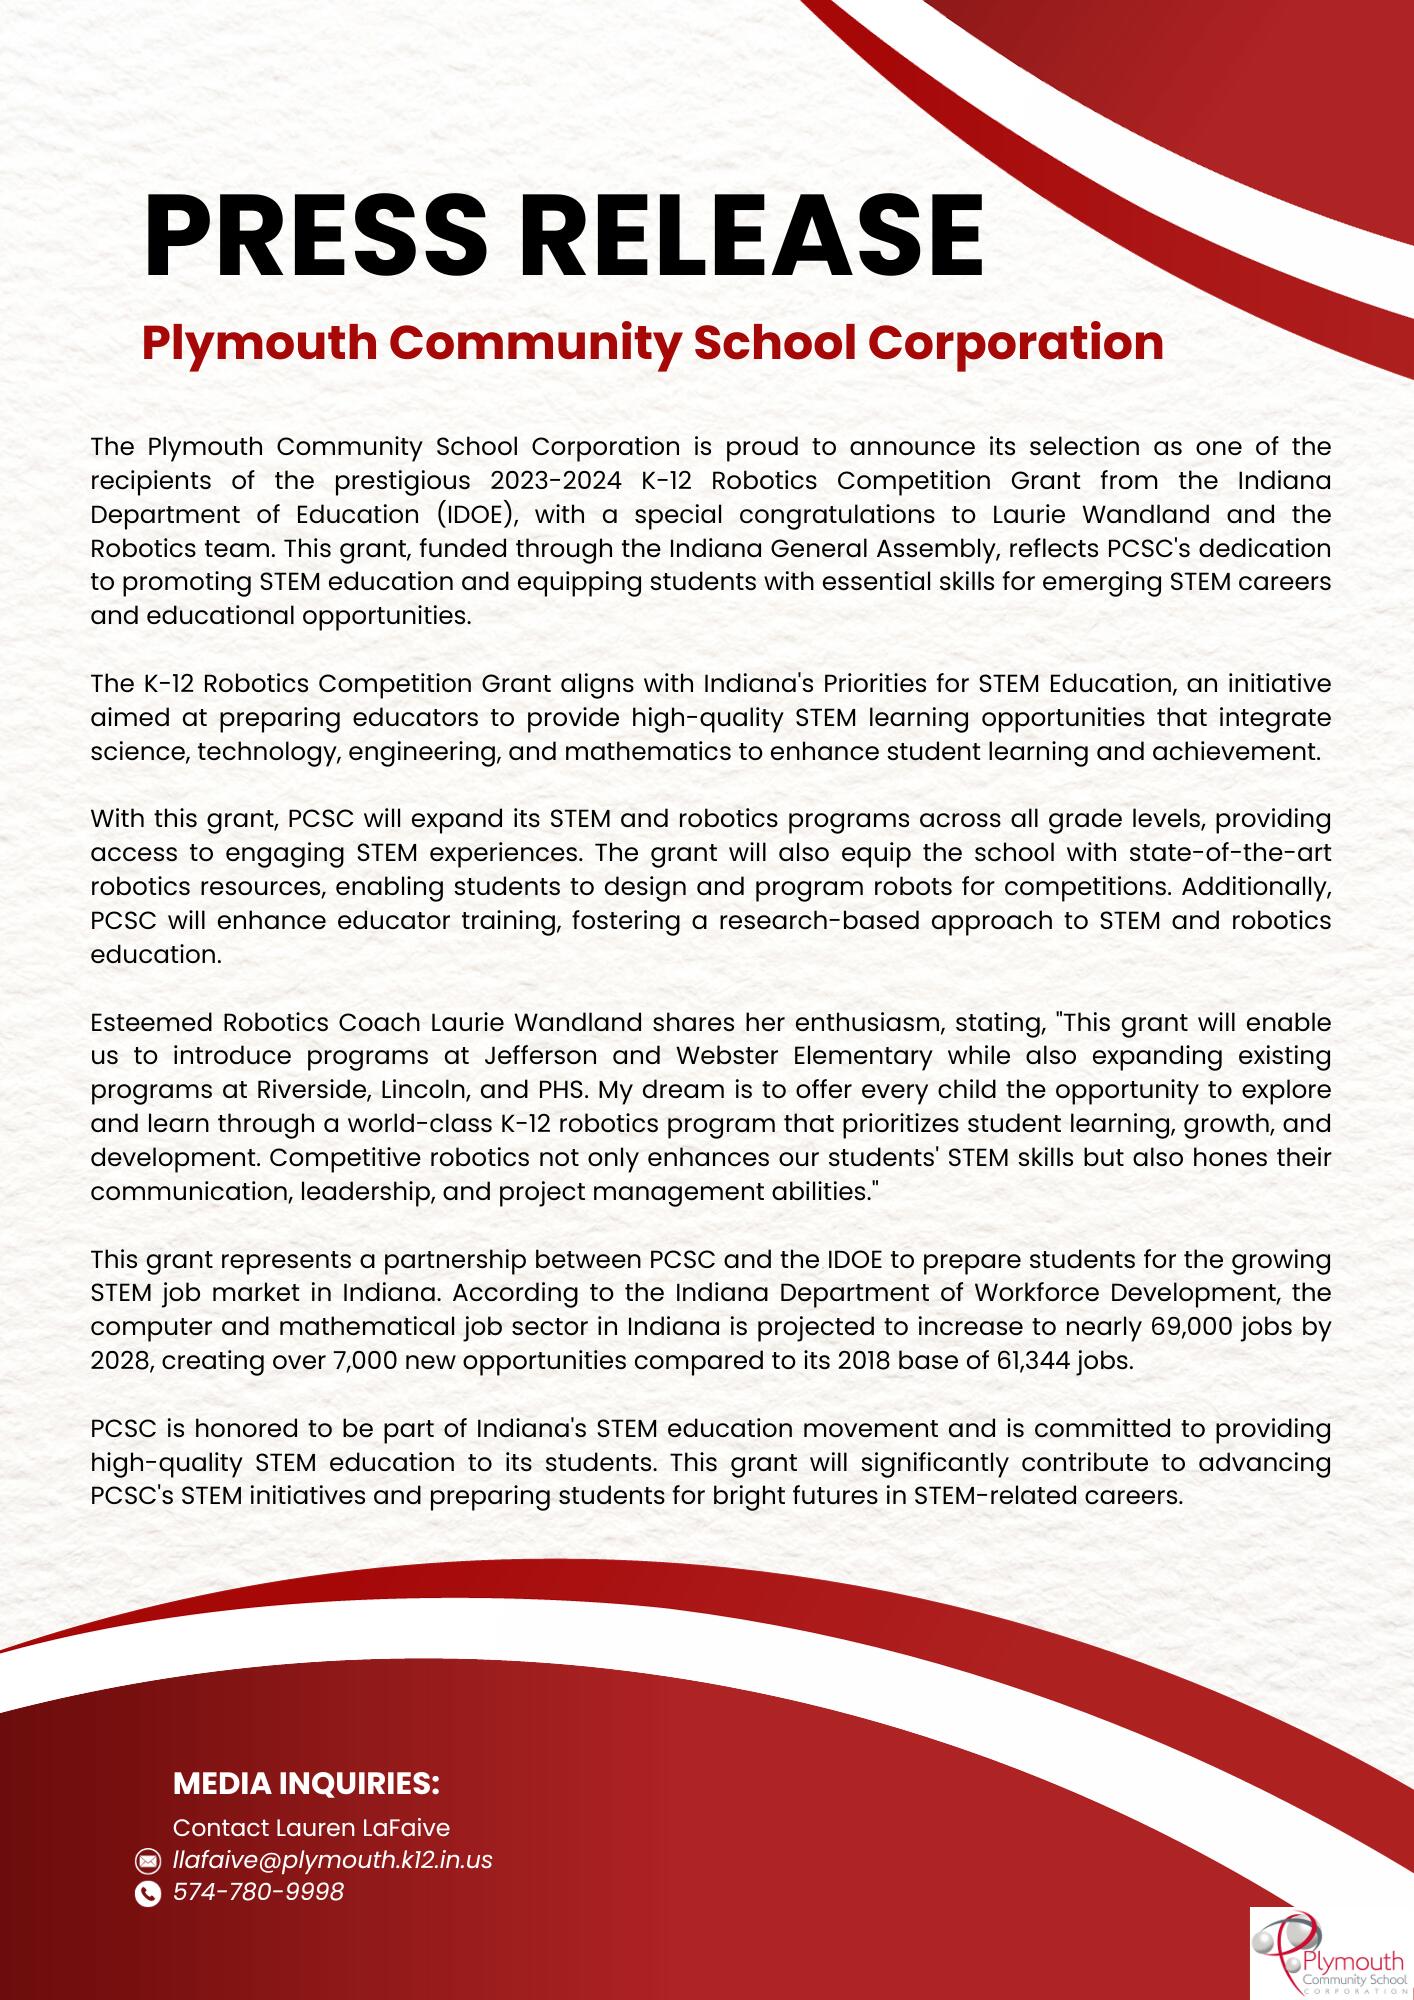 The Plymouth Community School Corporation is proud to announce its selection as one of the recipients of the prestigious 2023-2024 K-12 Robotics Competition Grant from the Indiana Department of Education (IDOE), with a special congratulations to Laurie Wandland and the Robotics team. This grant, funded through the Indiana General Assembly, reflects PCSC's dedication to promoting STEM education and equipping students with essential skills for emerging STEM careers and educational opportunities.  The K-12 Robotics Competition Grant aligns with Indiana's Priorities for STEM Education, an initiative aimed at preparing educators to provide high-quality STEM learning opportunities that integrate science, technology, engineering, and mathematics to enhance student learning and achievement.  With this grant, PCSC will expand its STEM and robotics programs across all grade levels, providing access to engaging STEM experiences. The grant will also equip the school with state-of-the-art robotics resources, enabling students to design and program robots for competitions. Additionally, PCSC will enhance educator training, fostering a research-based approach to STEM and robotics education.  Esteemed Robotics Coach Laurie Wandland shares her enthusiasm, stating, "This grant will enable us to introduce programs at Jefferson and Webster Elementary while also expanding existing programs at Riverside, Lincoln, and PHS. My dream is to offer every child the opportunity to explore and learn through a world-class K-12 robotics program that prioritizes student learning, growth, and development. Competitive robotics not only enhances our students' STEM skills but also hones their communication, leadership, and project management abilities."  This grant represents a partnership between PCSC and the IDOE to prepare students for the growing STEM job market in Indiana. According to the Indiana Department of Workforce Development, the computer and mathematical job sector in Indiana is projected to increase to nearly 69,000 jobs by 2028, creating over 7,000 new opportunities compared to its 2018 base of 61,344 jobs.  PCSC is honored to be part of Indiana's STEM education movement and is committed to providing high-quality STEM education to its students. This grant will significantly contribute to advancing PCSC's STEM initiatives and preparing students for bright futures in STEM-related careers. 